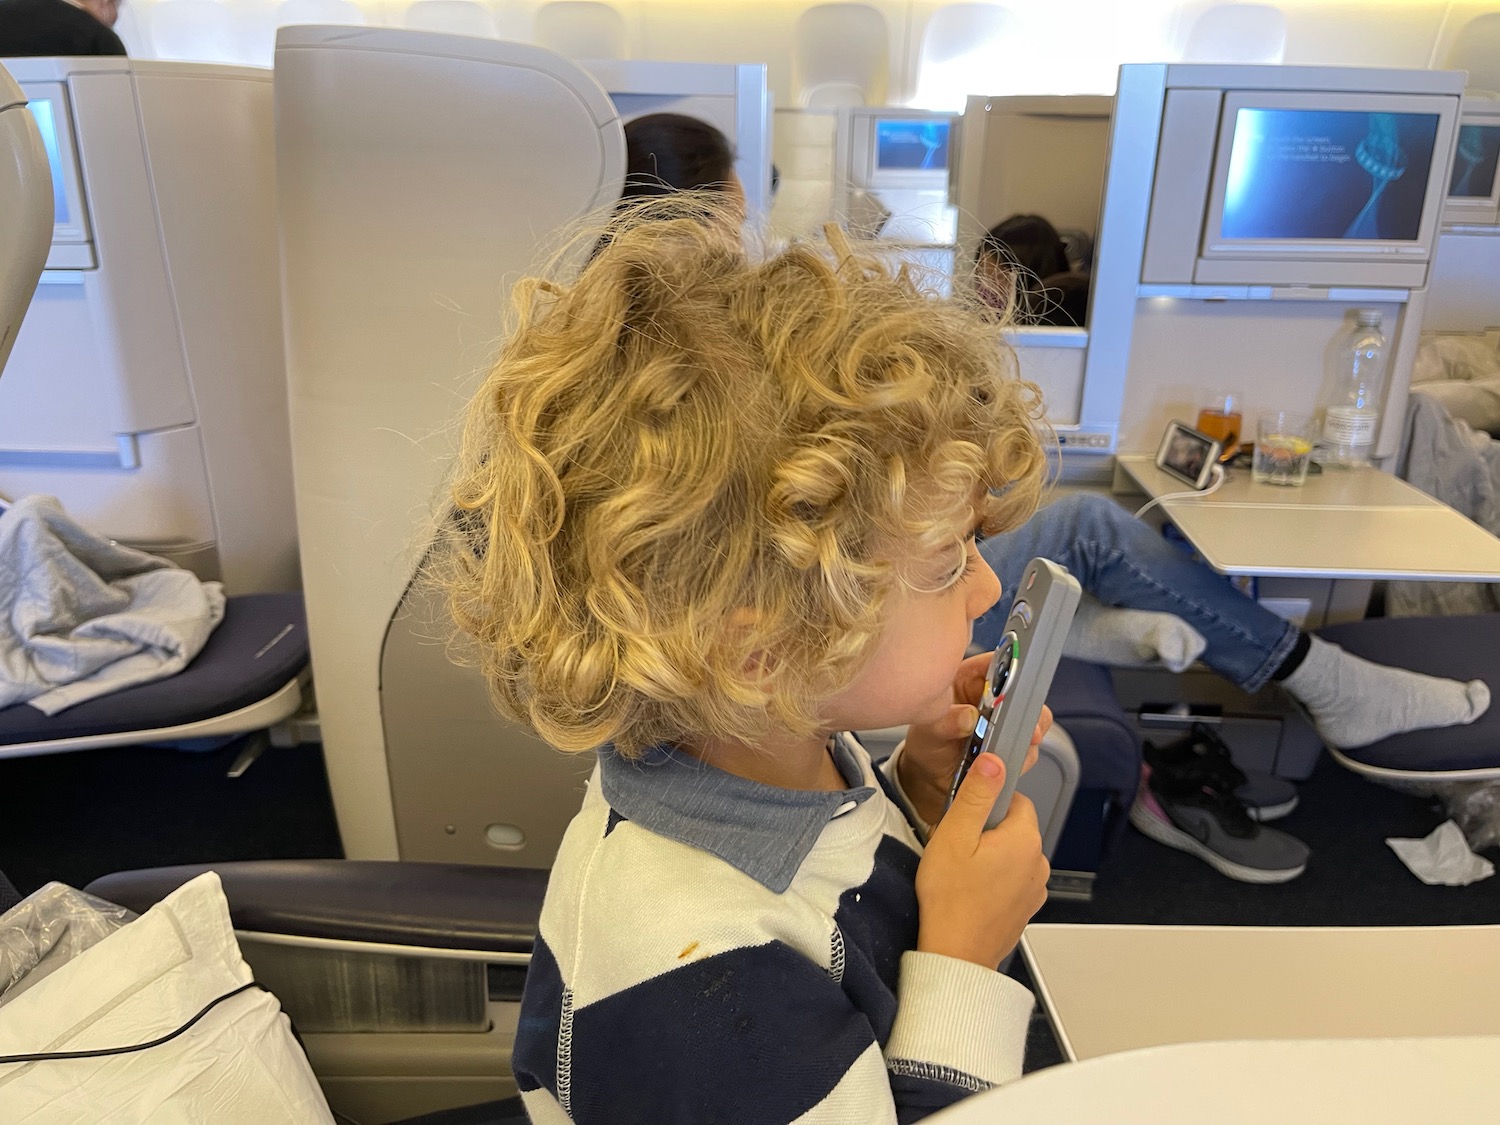 a child sitting in an airplane holding a phone